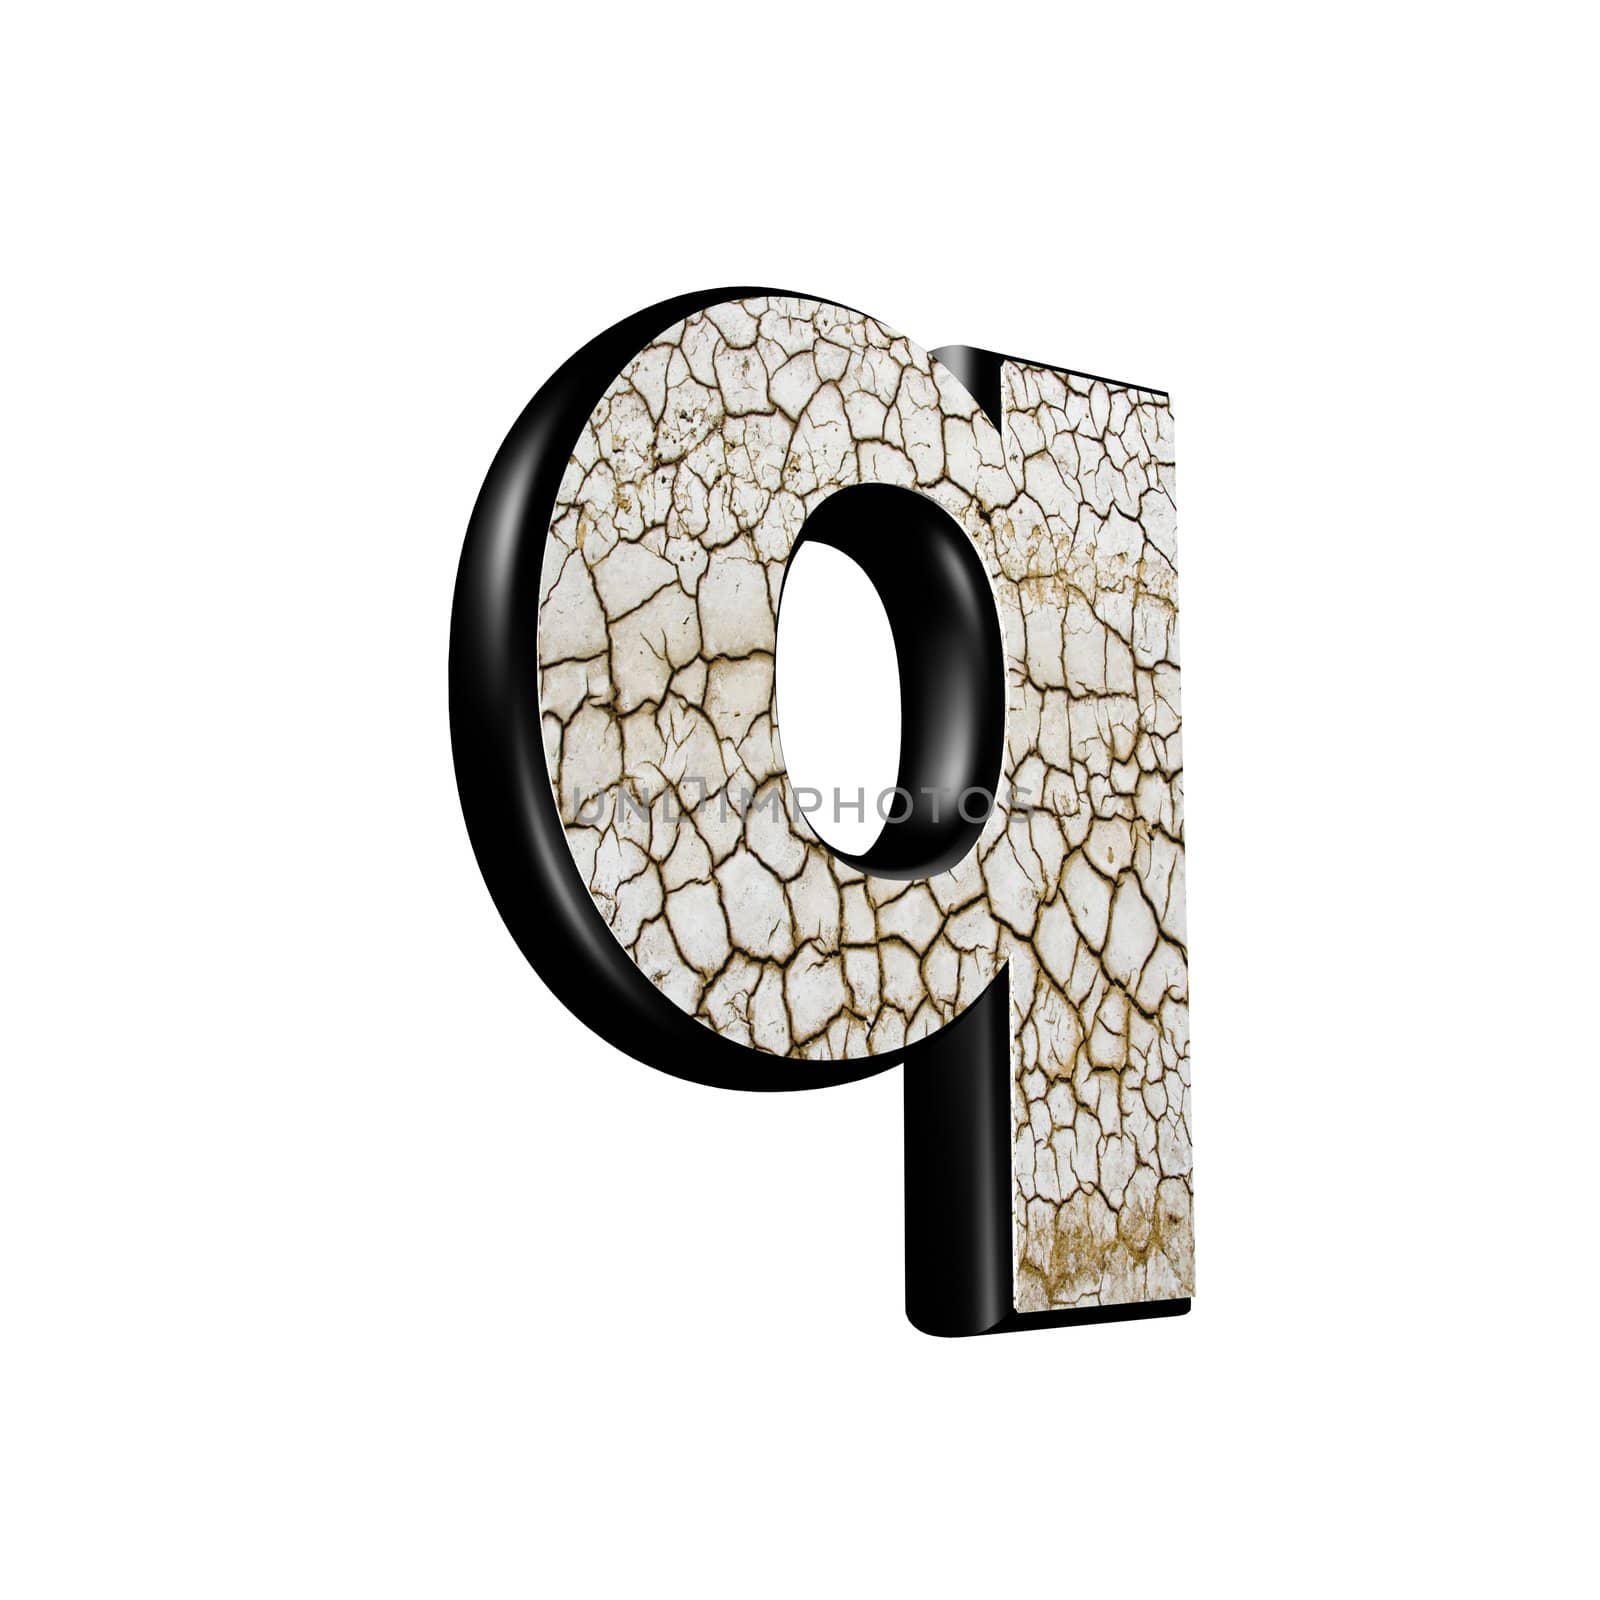 abstract 3d letter with dry ground texture - Q by chrisroll